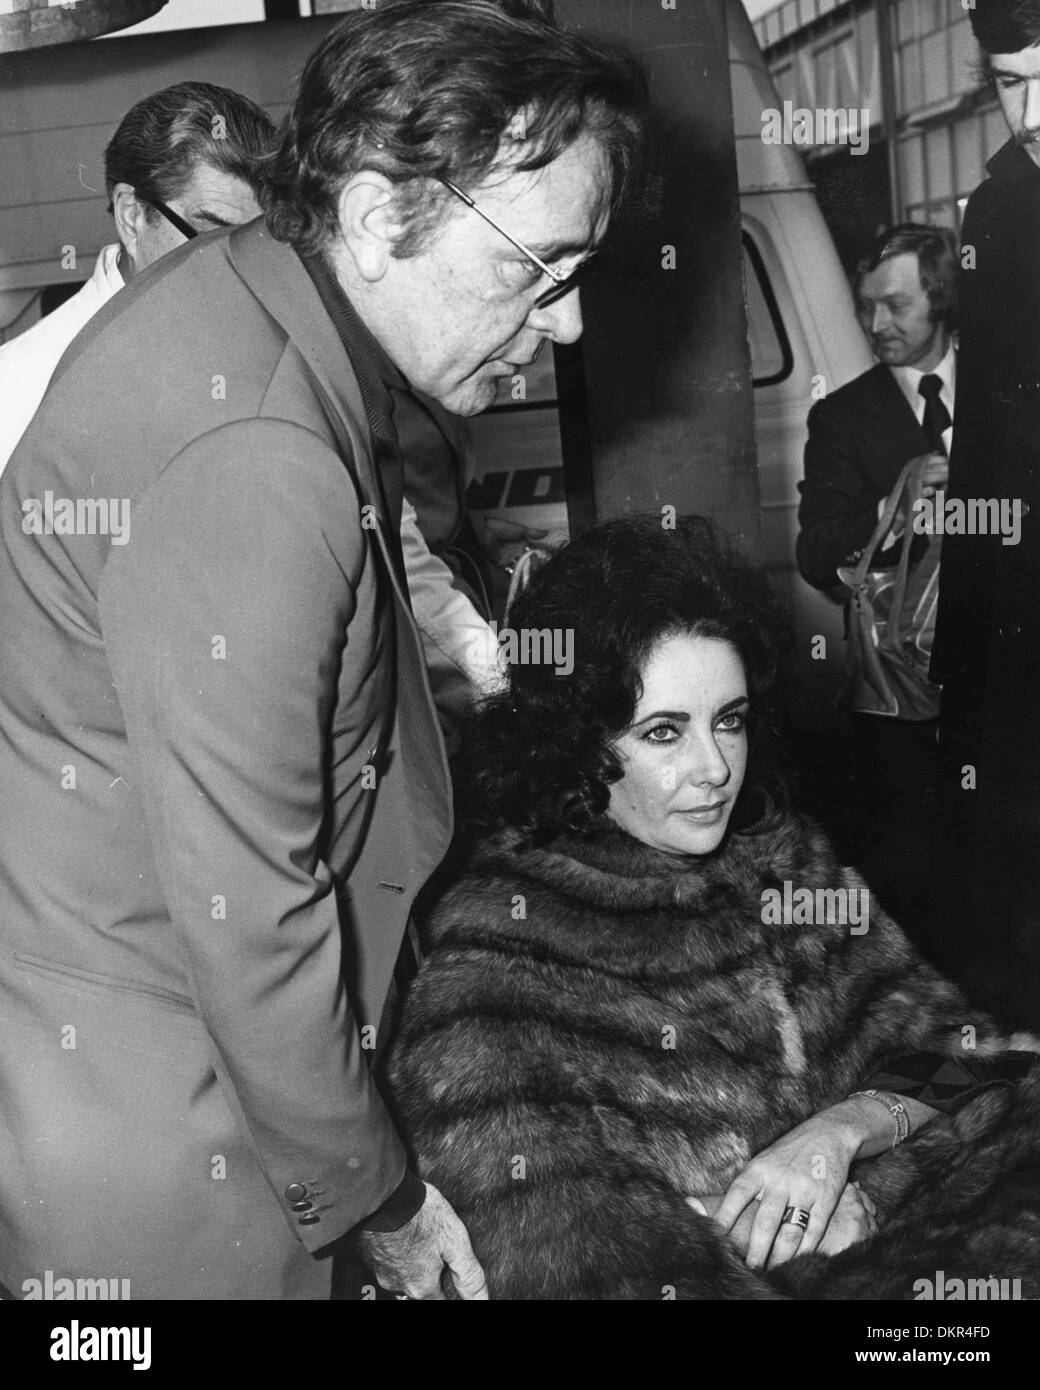 Dec. 10, 1973 - London, England, U.K. - Two time Academy Award winning actress ELIZABETH TAYLOR (1932-2011) arrives at Heathrow Airport with husband RICHARD BURTON after discharging herself from the hospital after removal of an ovarian cyst. (Credit Image: © KEYSTONE Pictures USA) Stock Photo